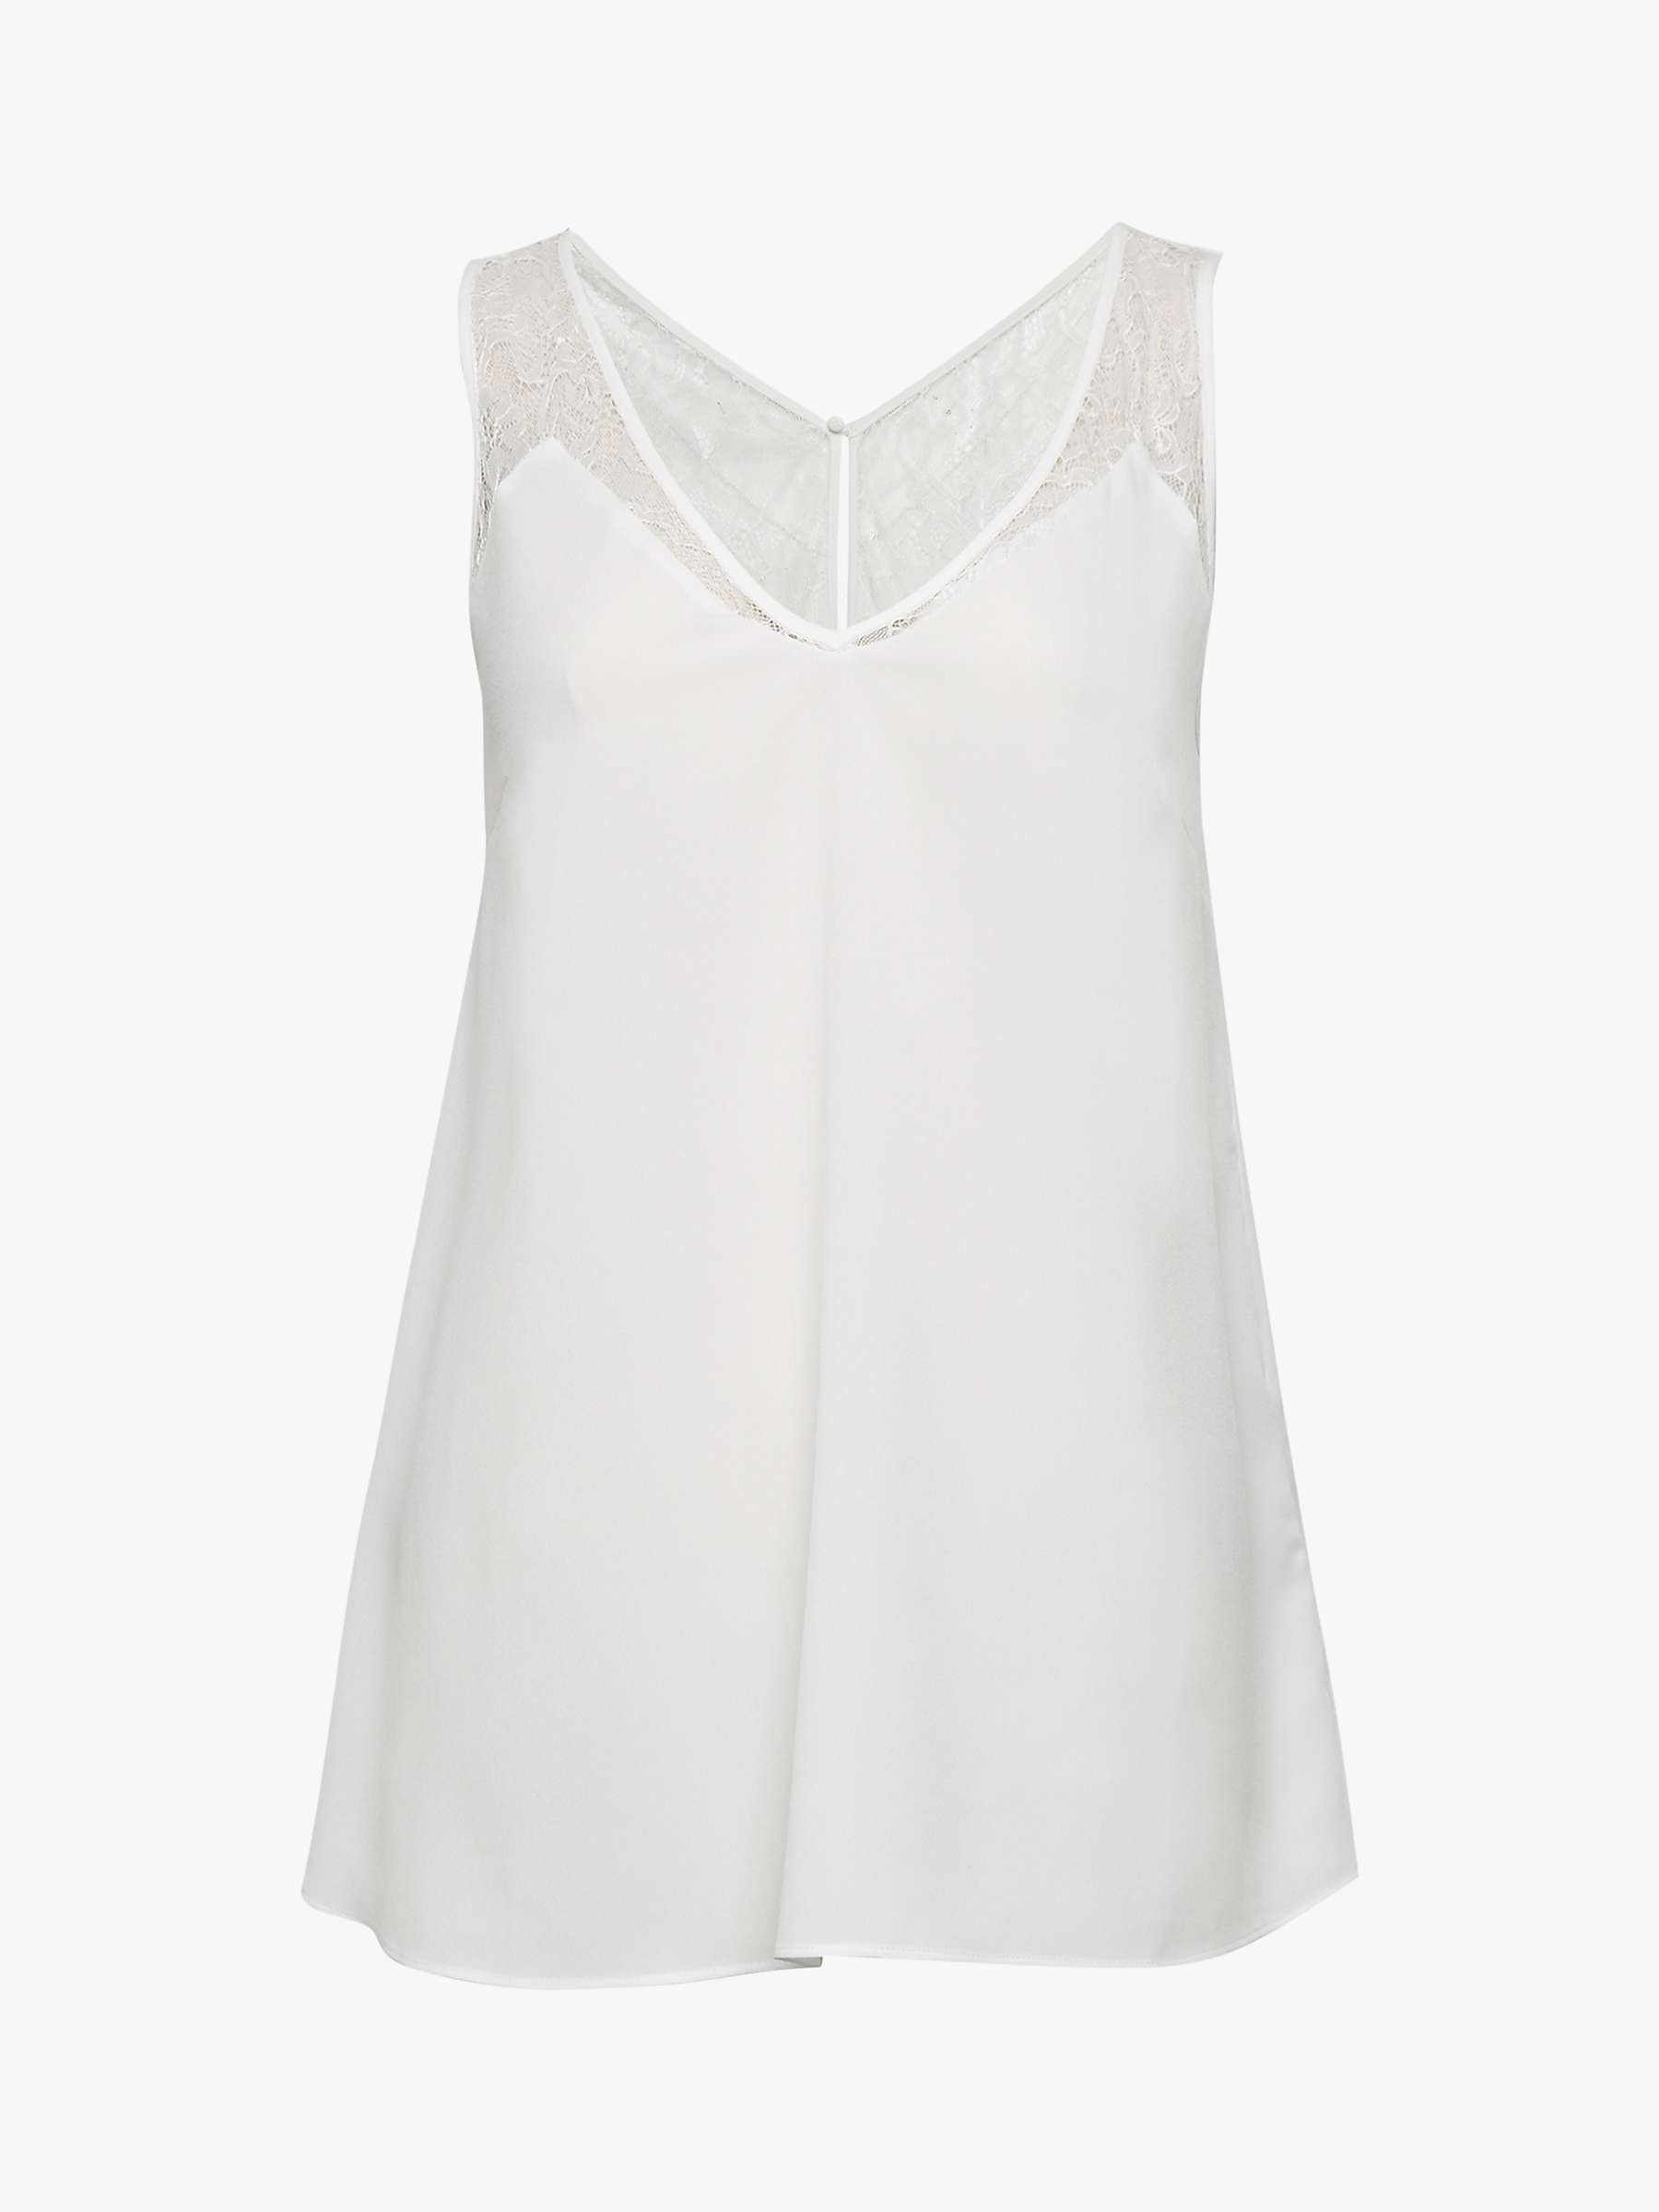 Buy French Connection Crepe Lace Trim Vest, Winter White Online at johnlewis.com